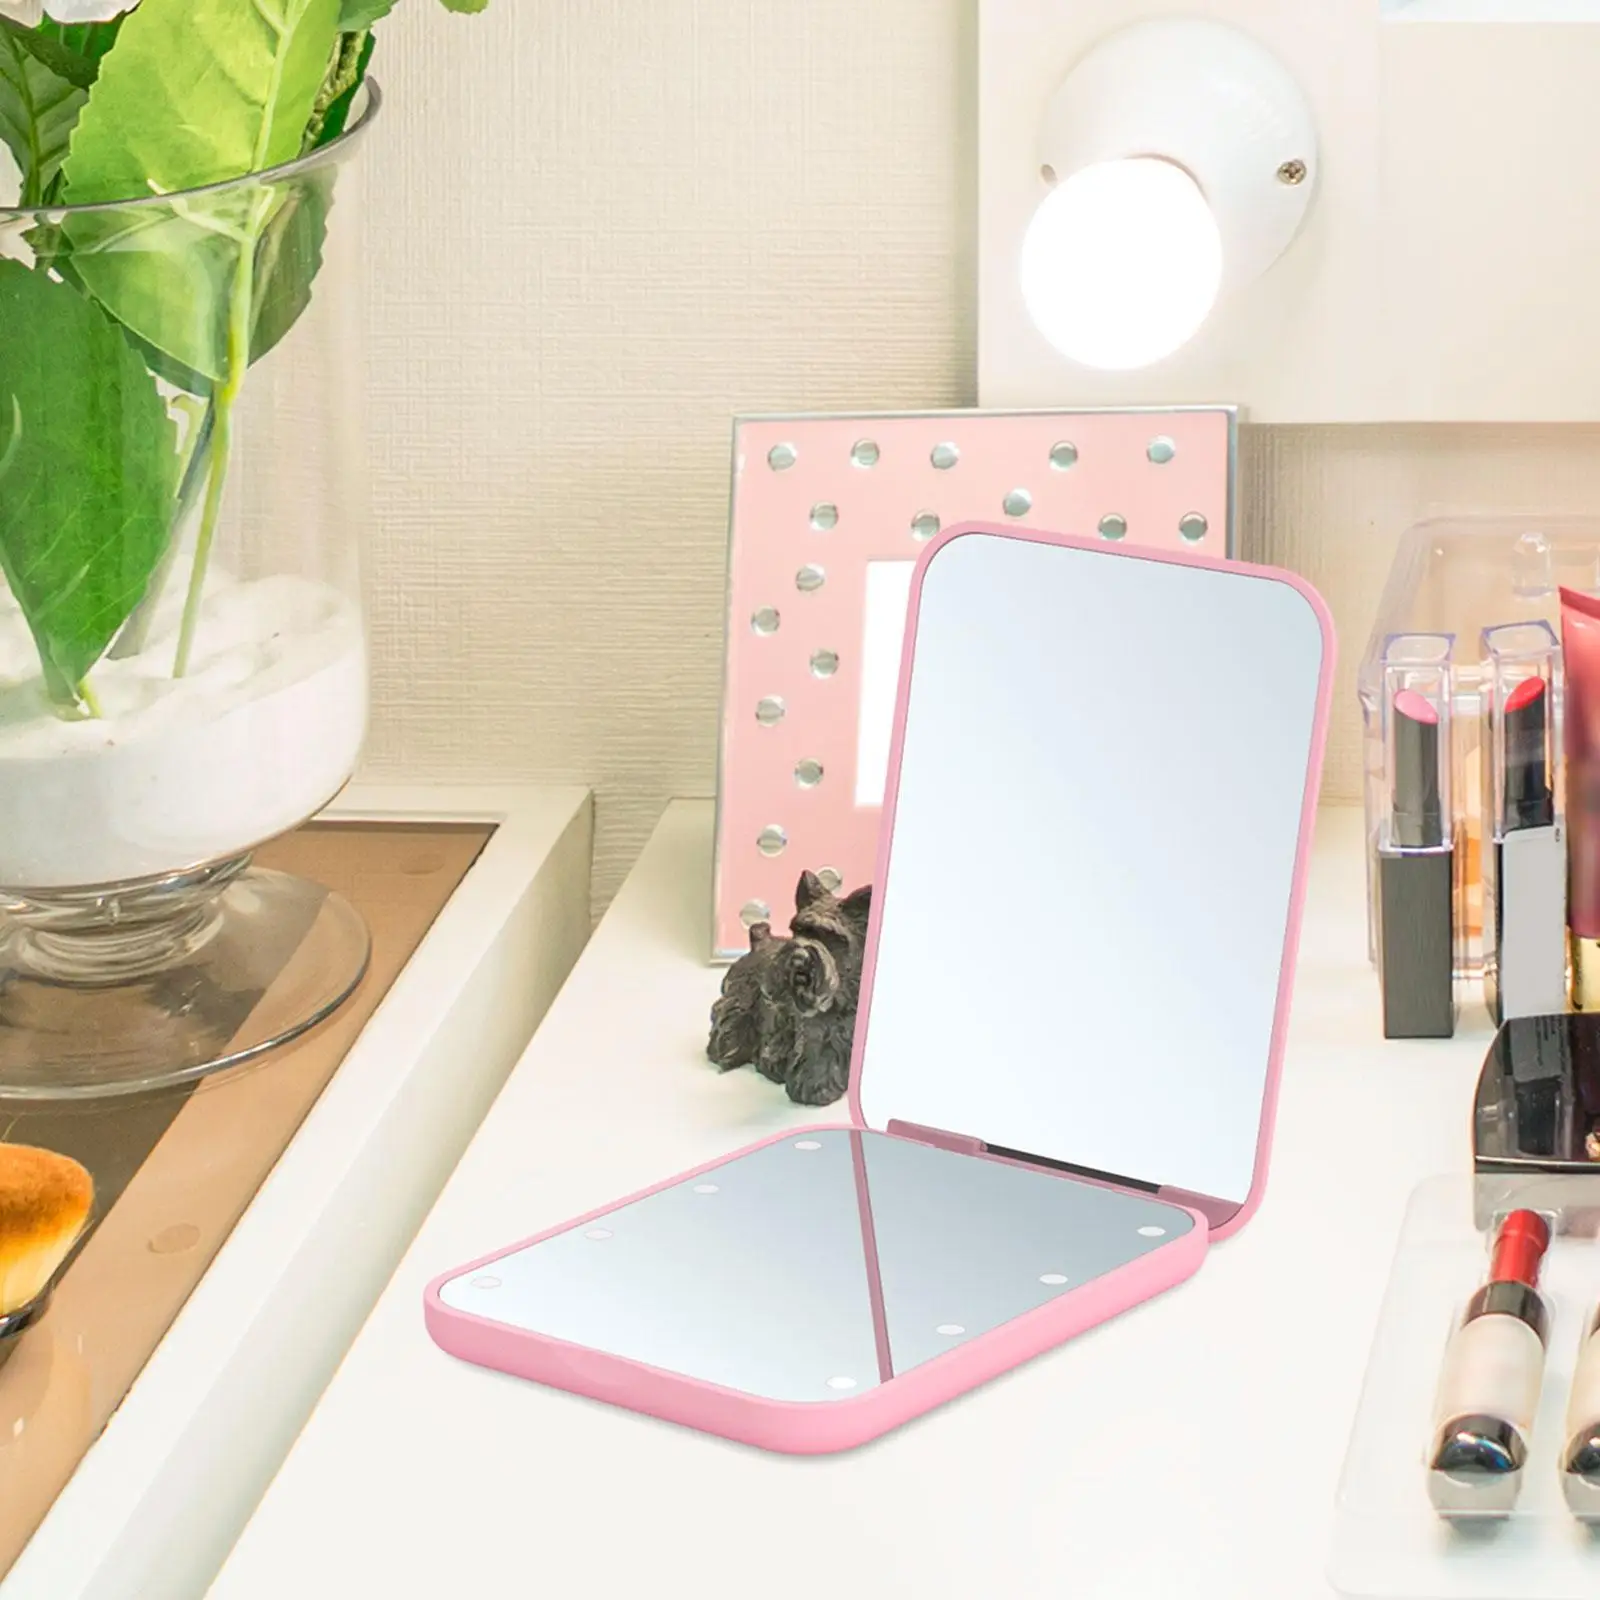 LED Makeup Mirror with Light with 2x Magnifying Compact Woman Gift Tabletop Vanity Mirror for Bedroom Home Hotel Dormitory